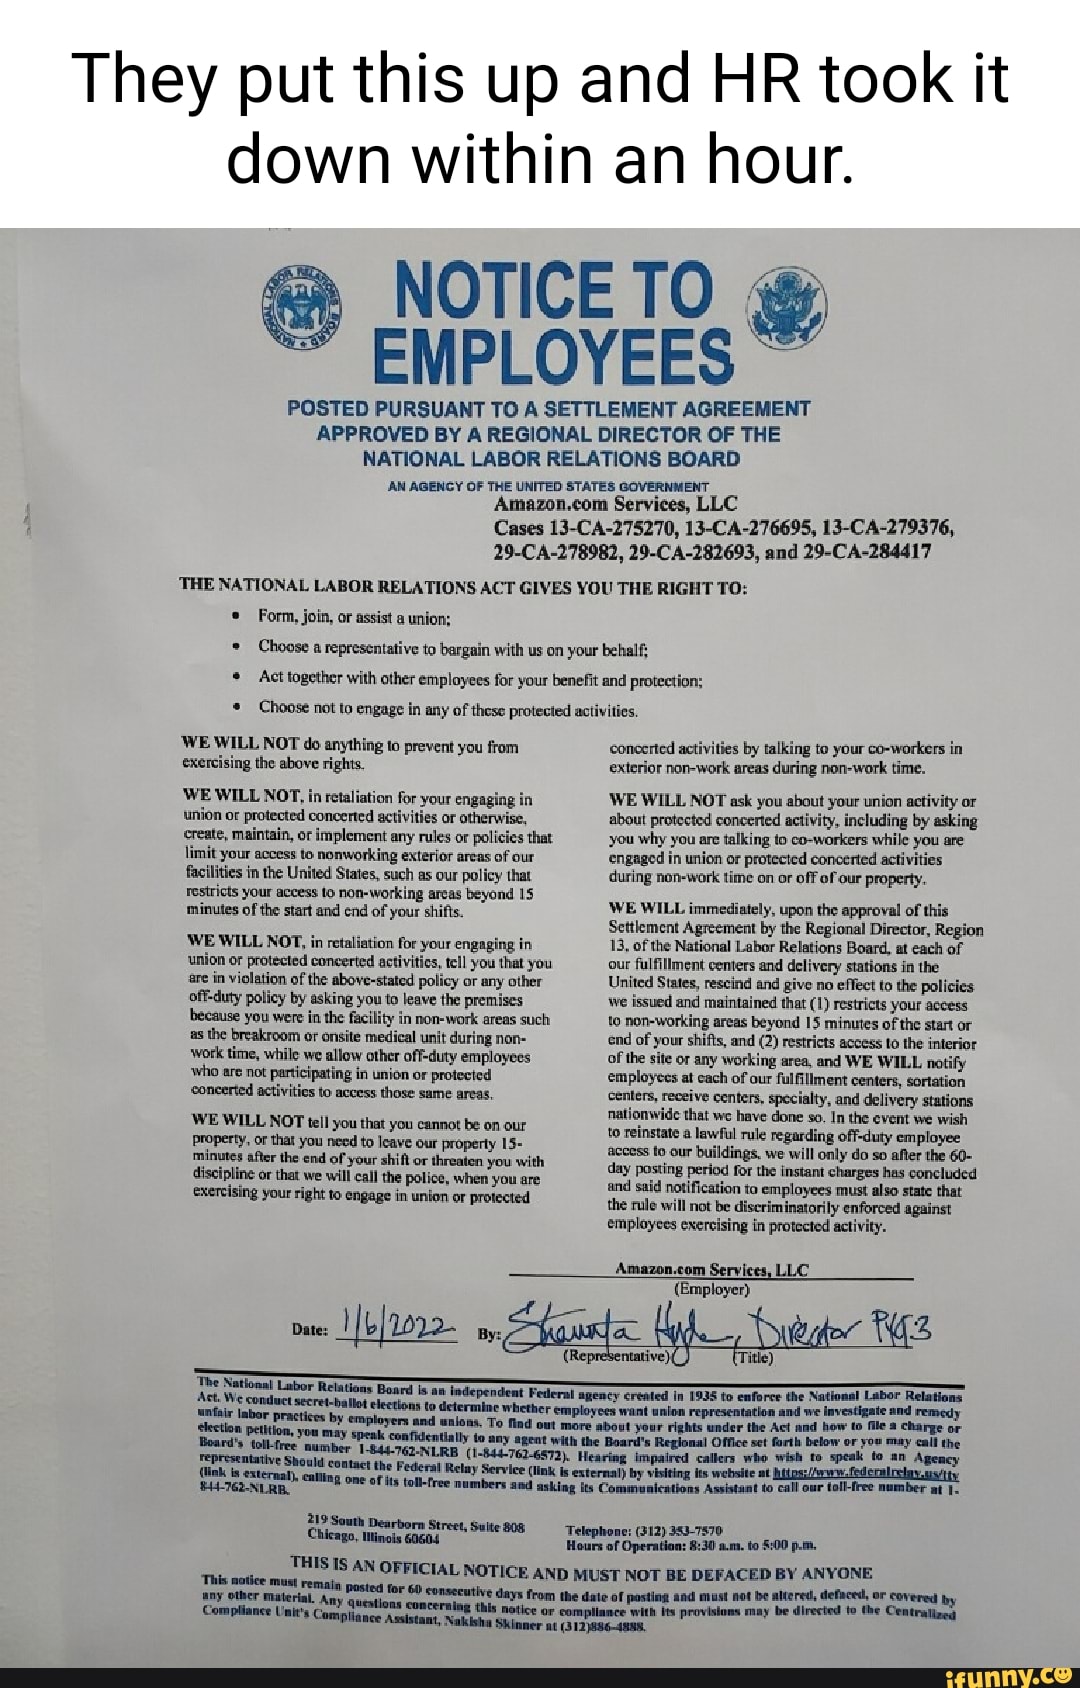 Violated Nationwide Employee Rights' Settlement, NLRB